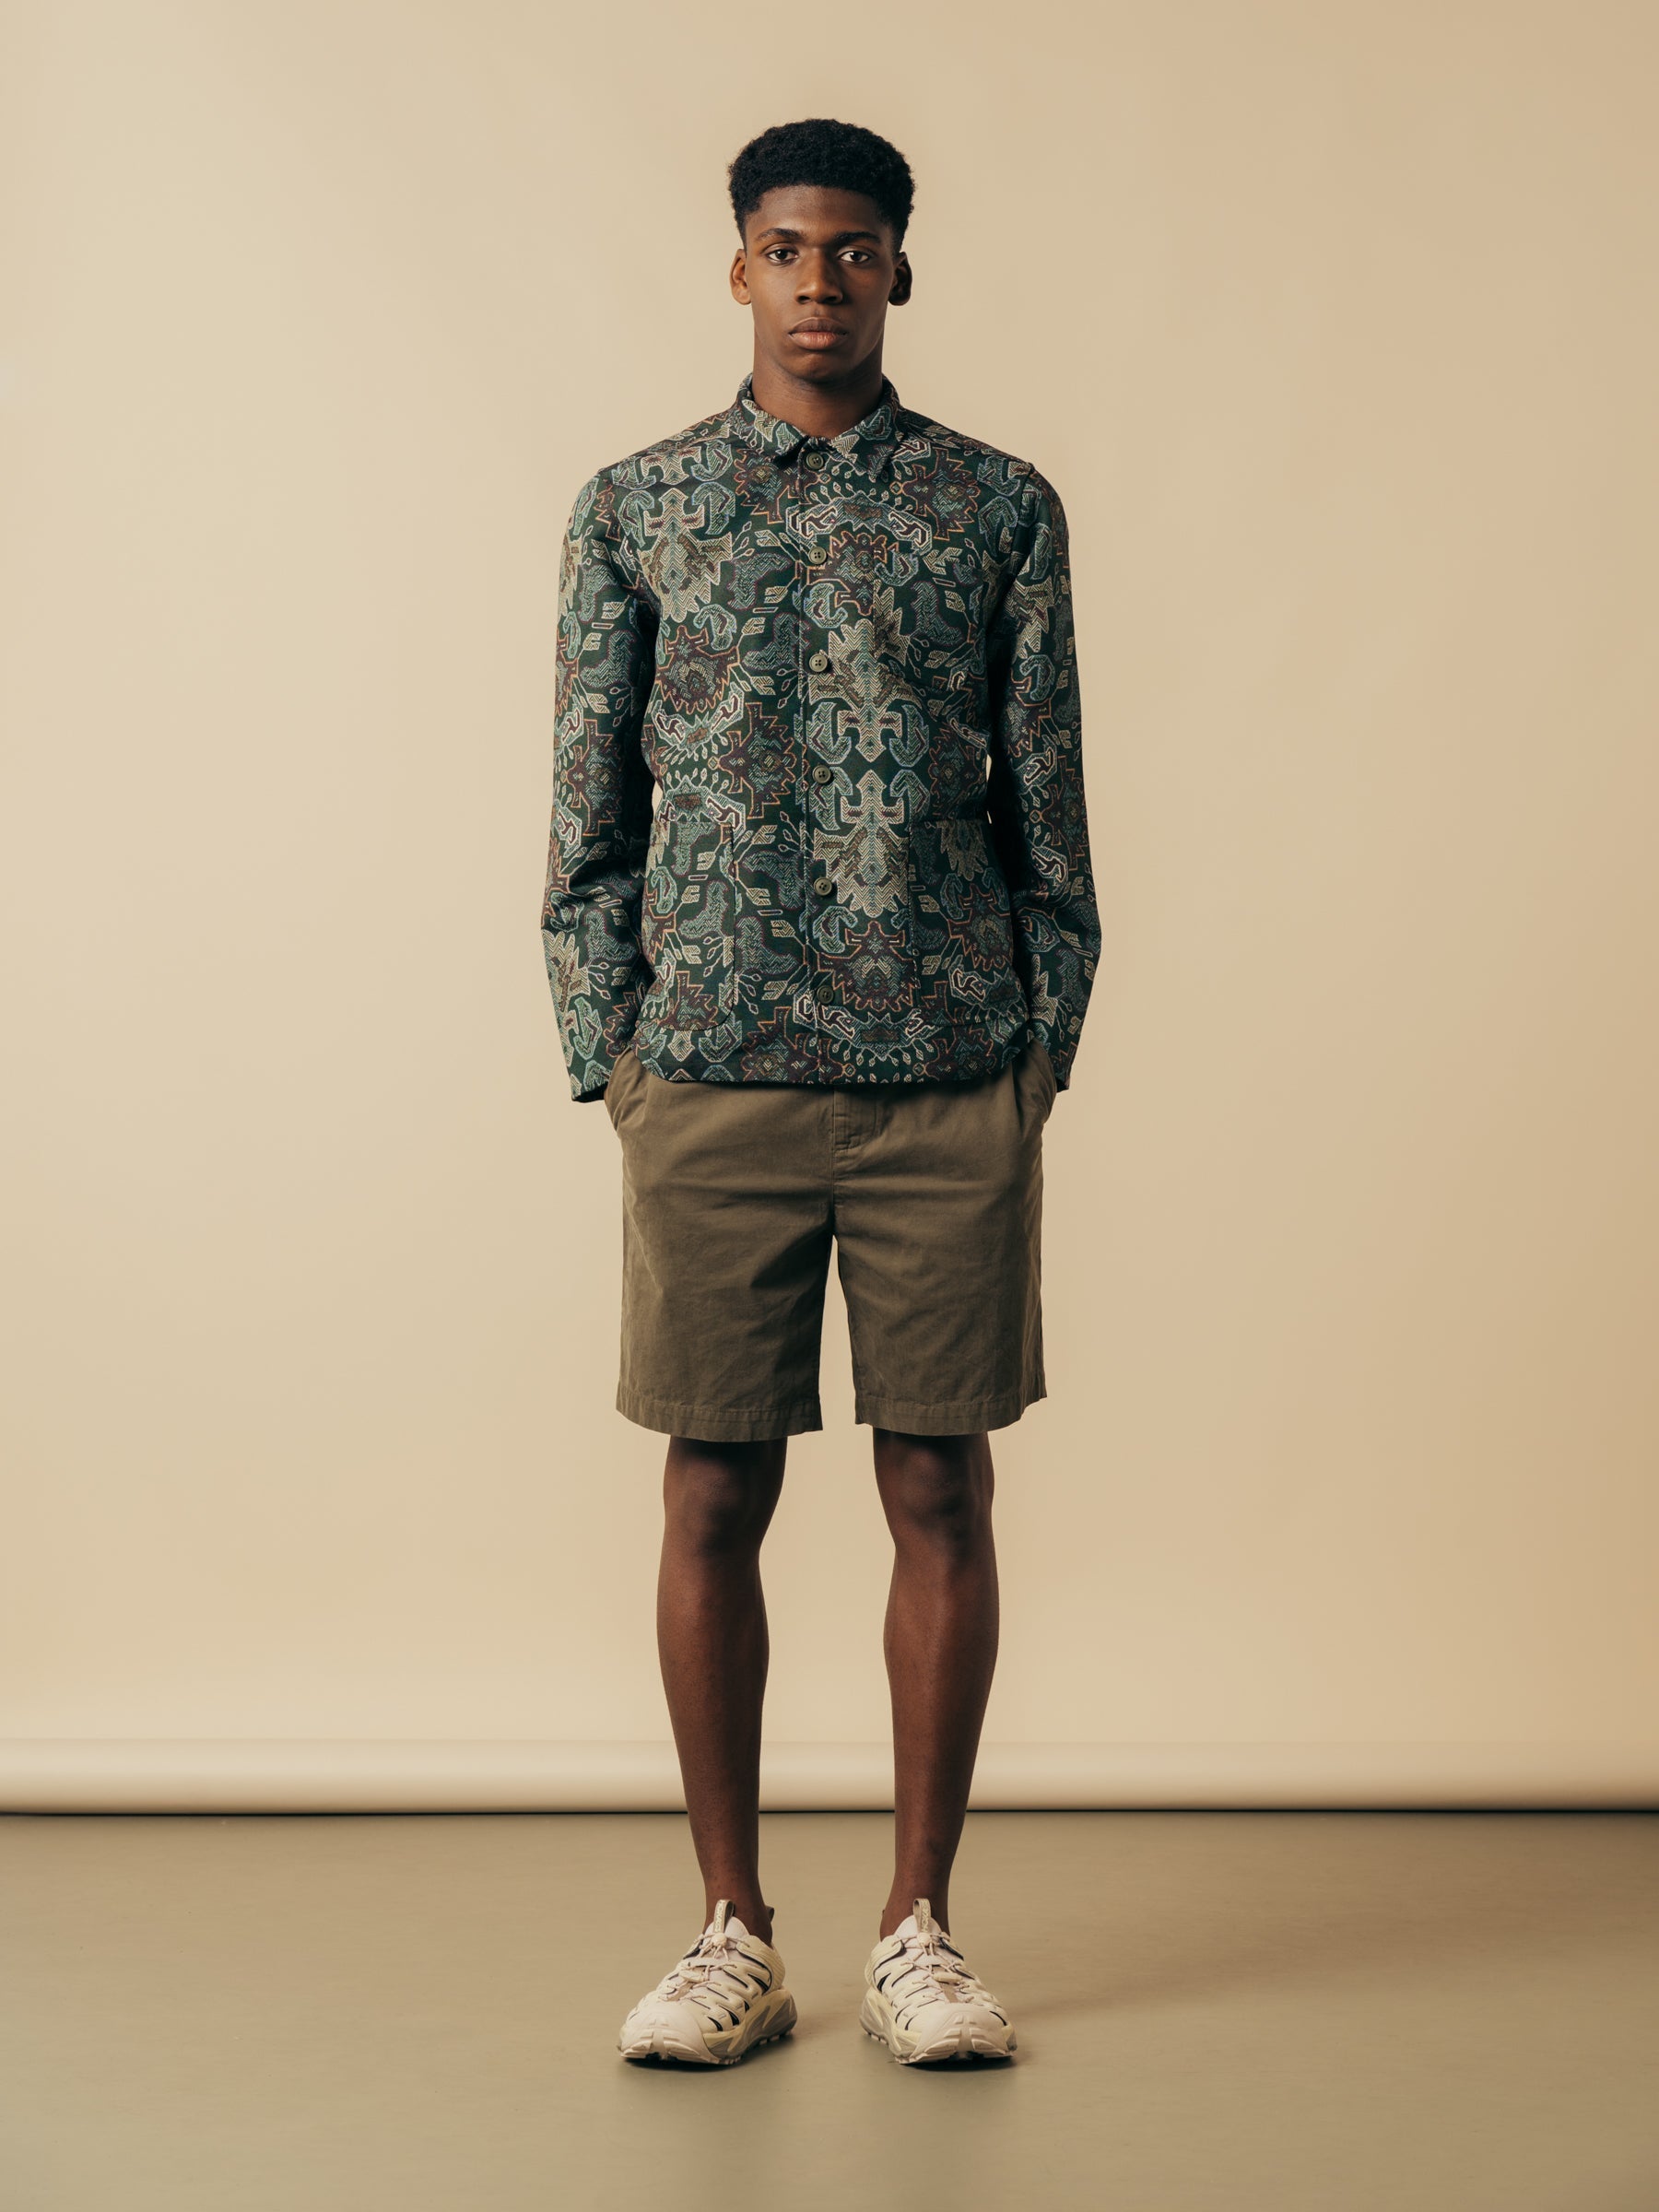 A model wearing a pair of shorts and a jacket from menswear brand KESTIN.